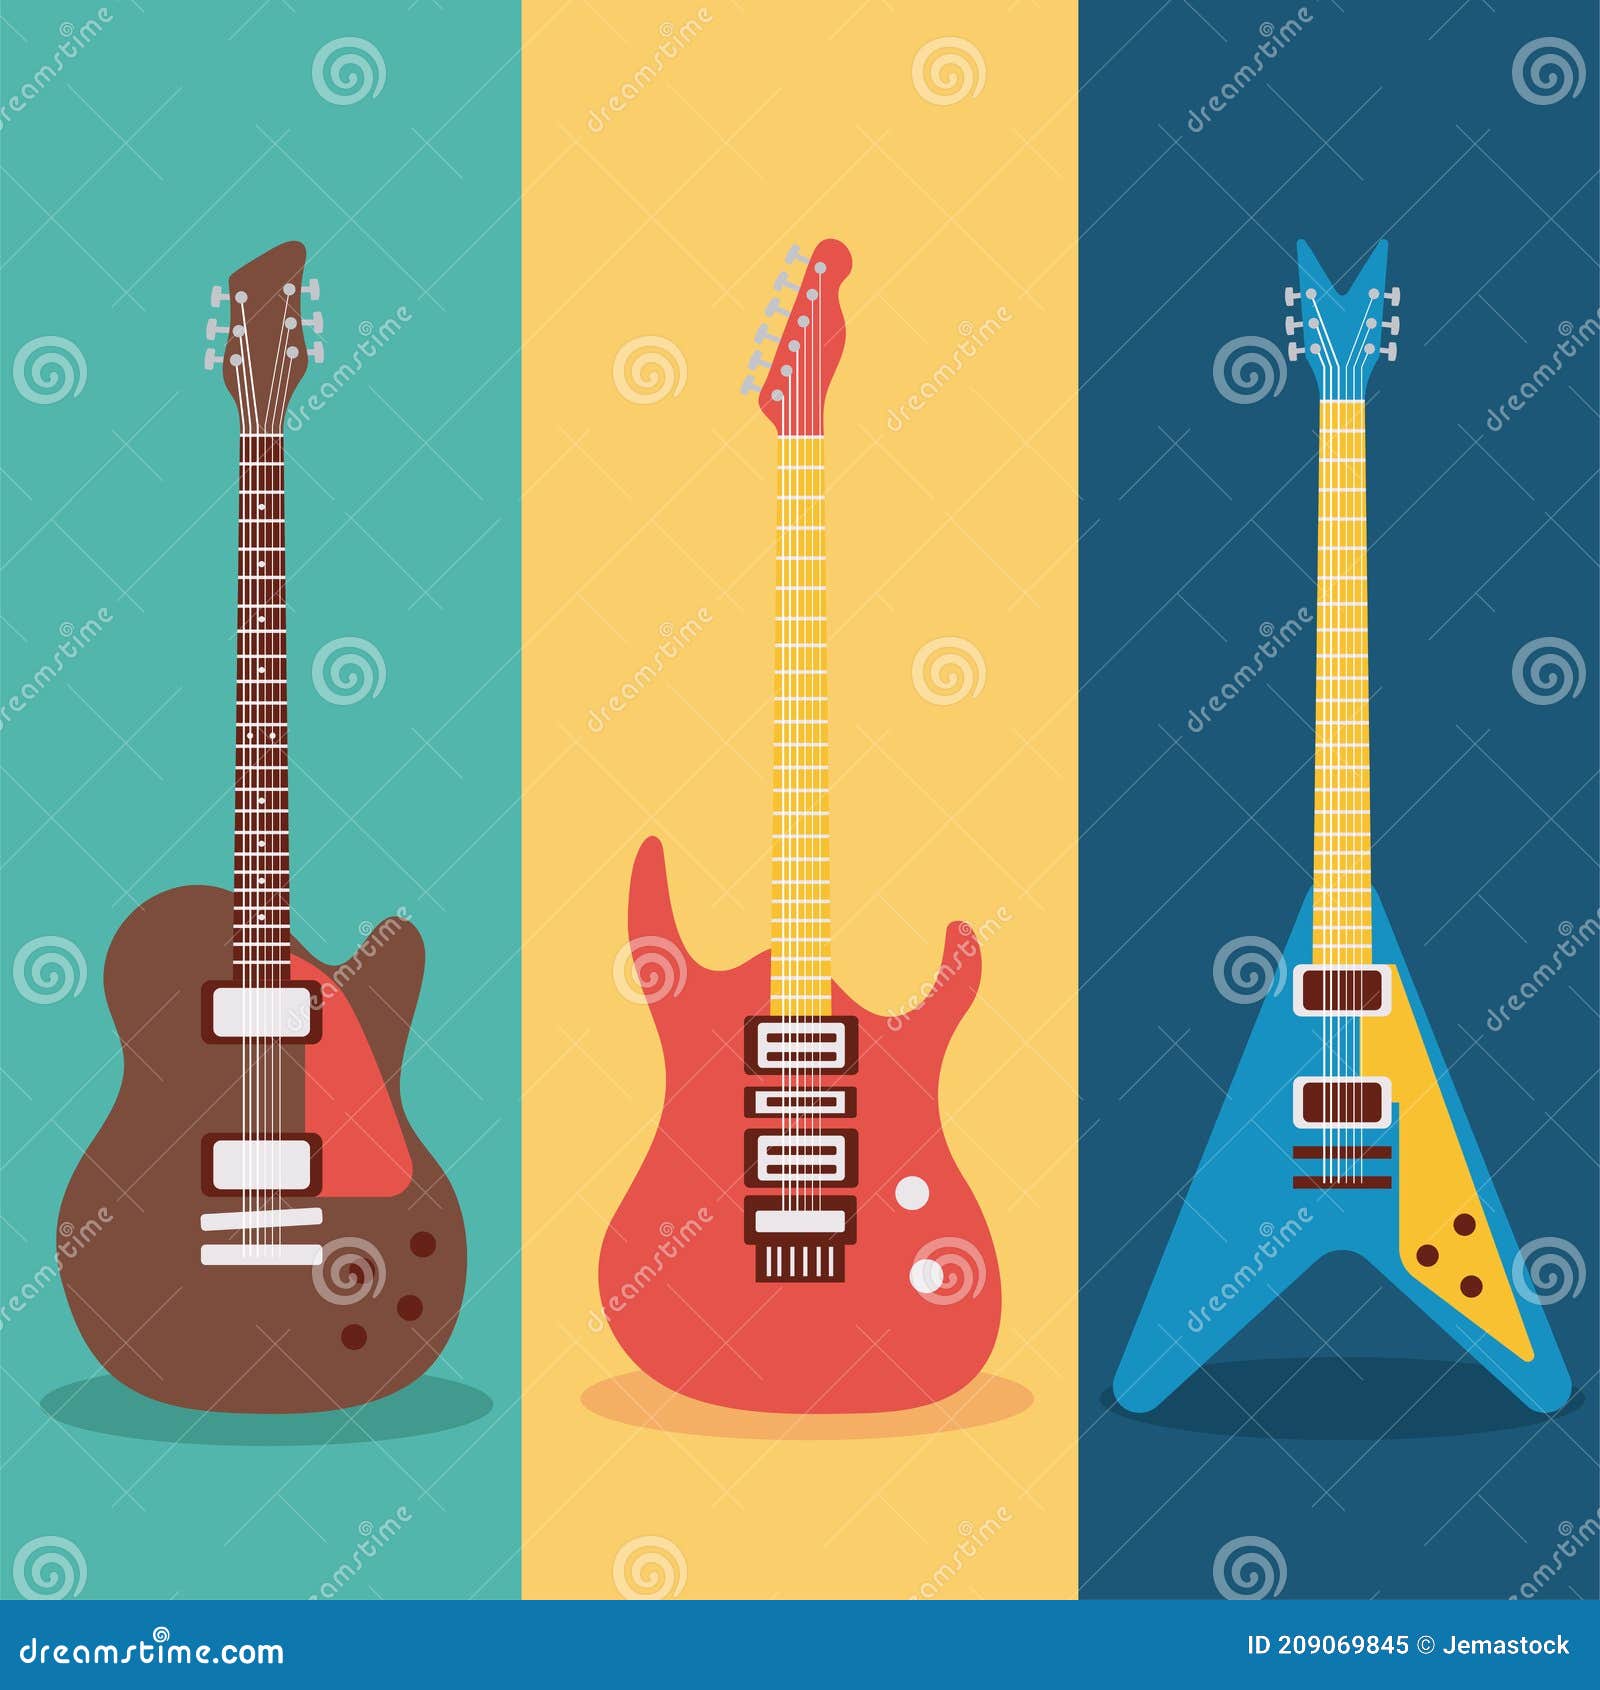 three guitars instruments musicals set icons in colors backgrounds